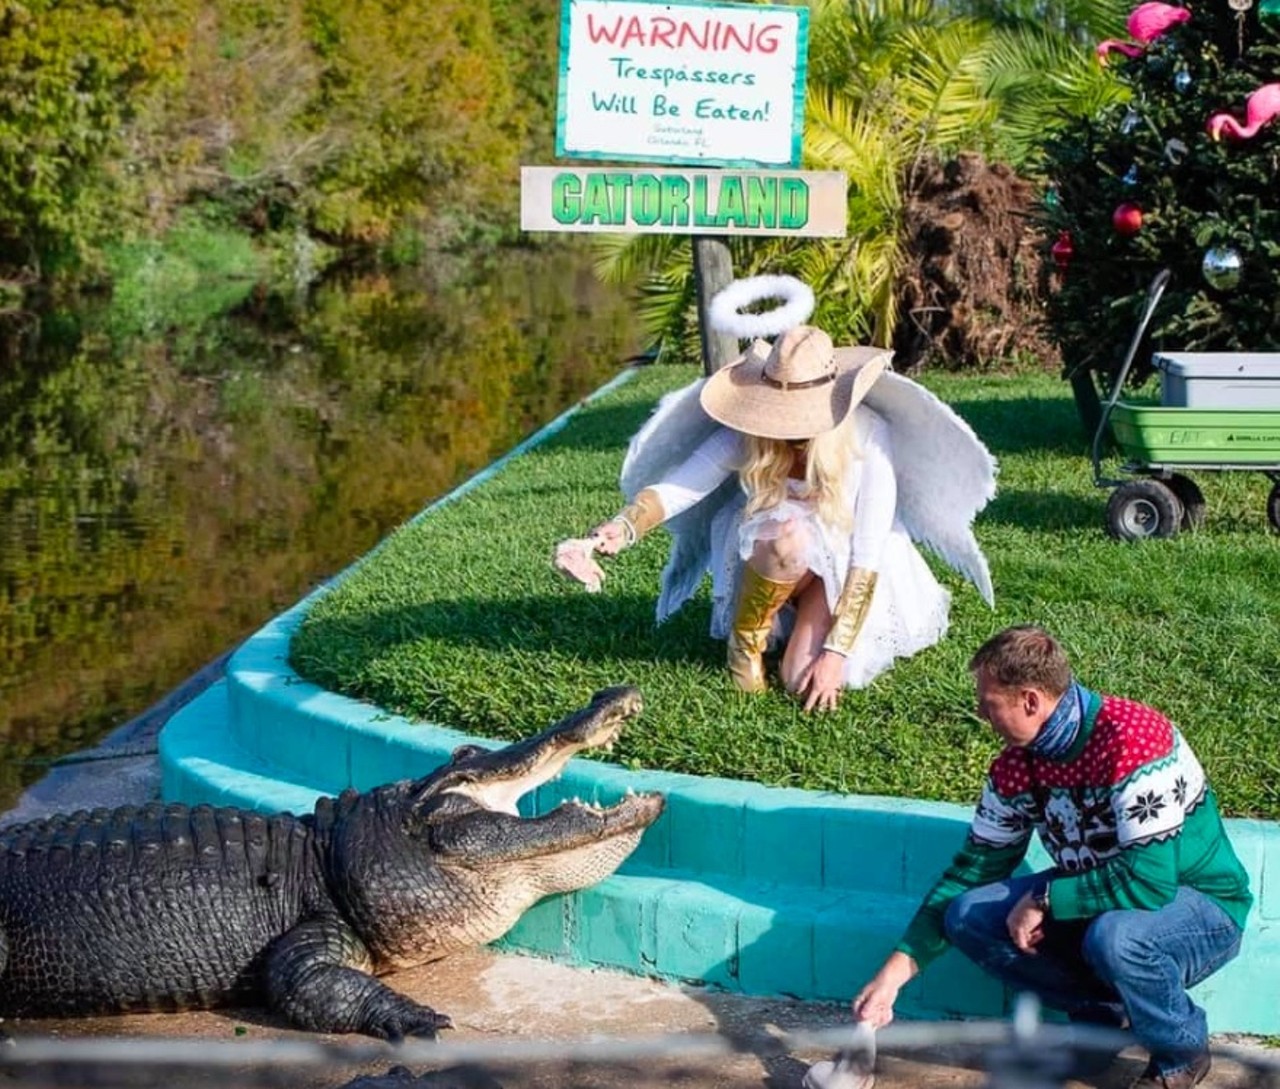 Gatorland's Ho Ho Ho-Down 
14501 S. Orange Blossom Trail, Orlando
Dates open: Dec. 2-3, 9-10, 16-17
Cost: Park admission
Gatorland's Ho Ho Ho-Down holiday event features Christmas-themed set-ups, music, festive food and plenty of wild photo-ops.